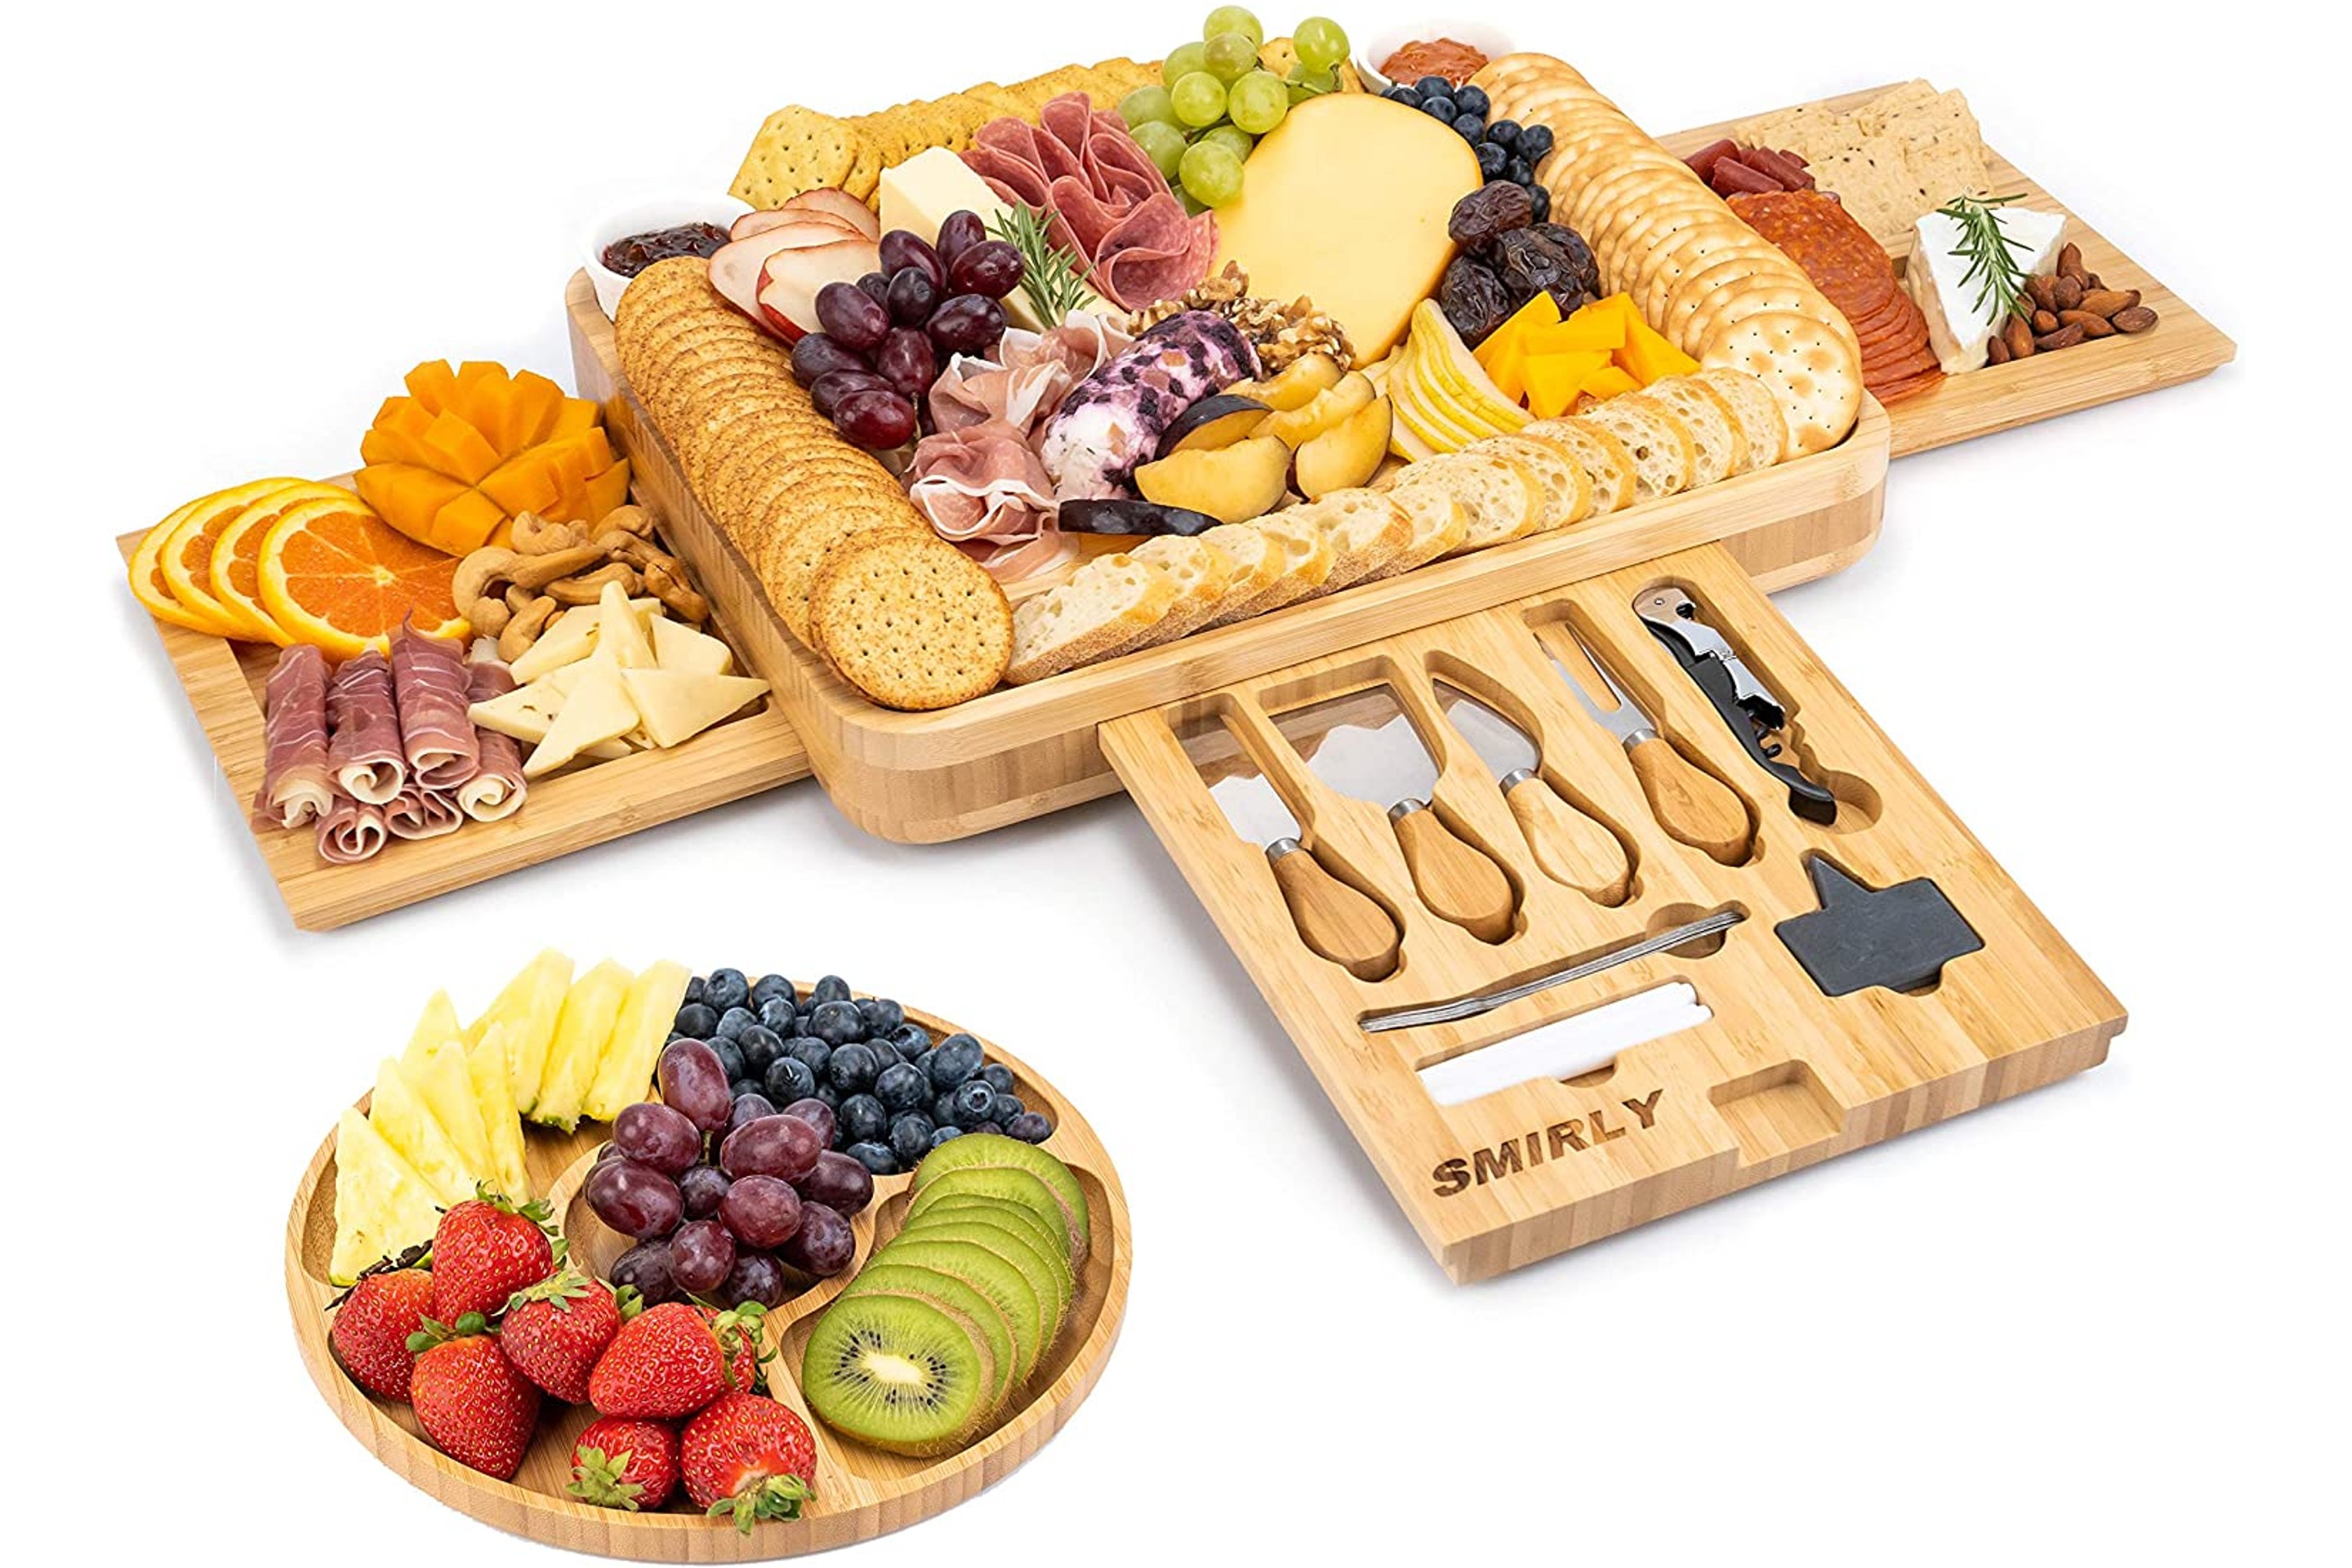 Charcuterie Board, Cheese Board, and Knife Set